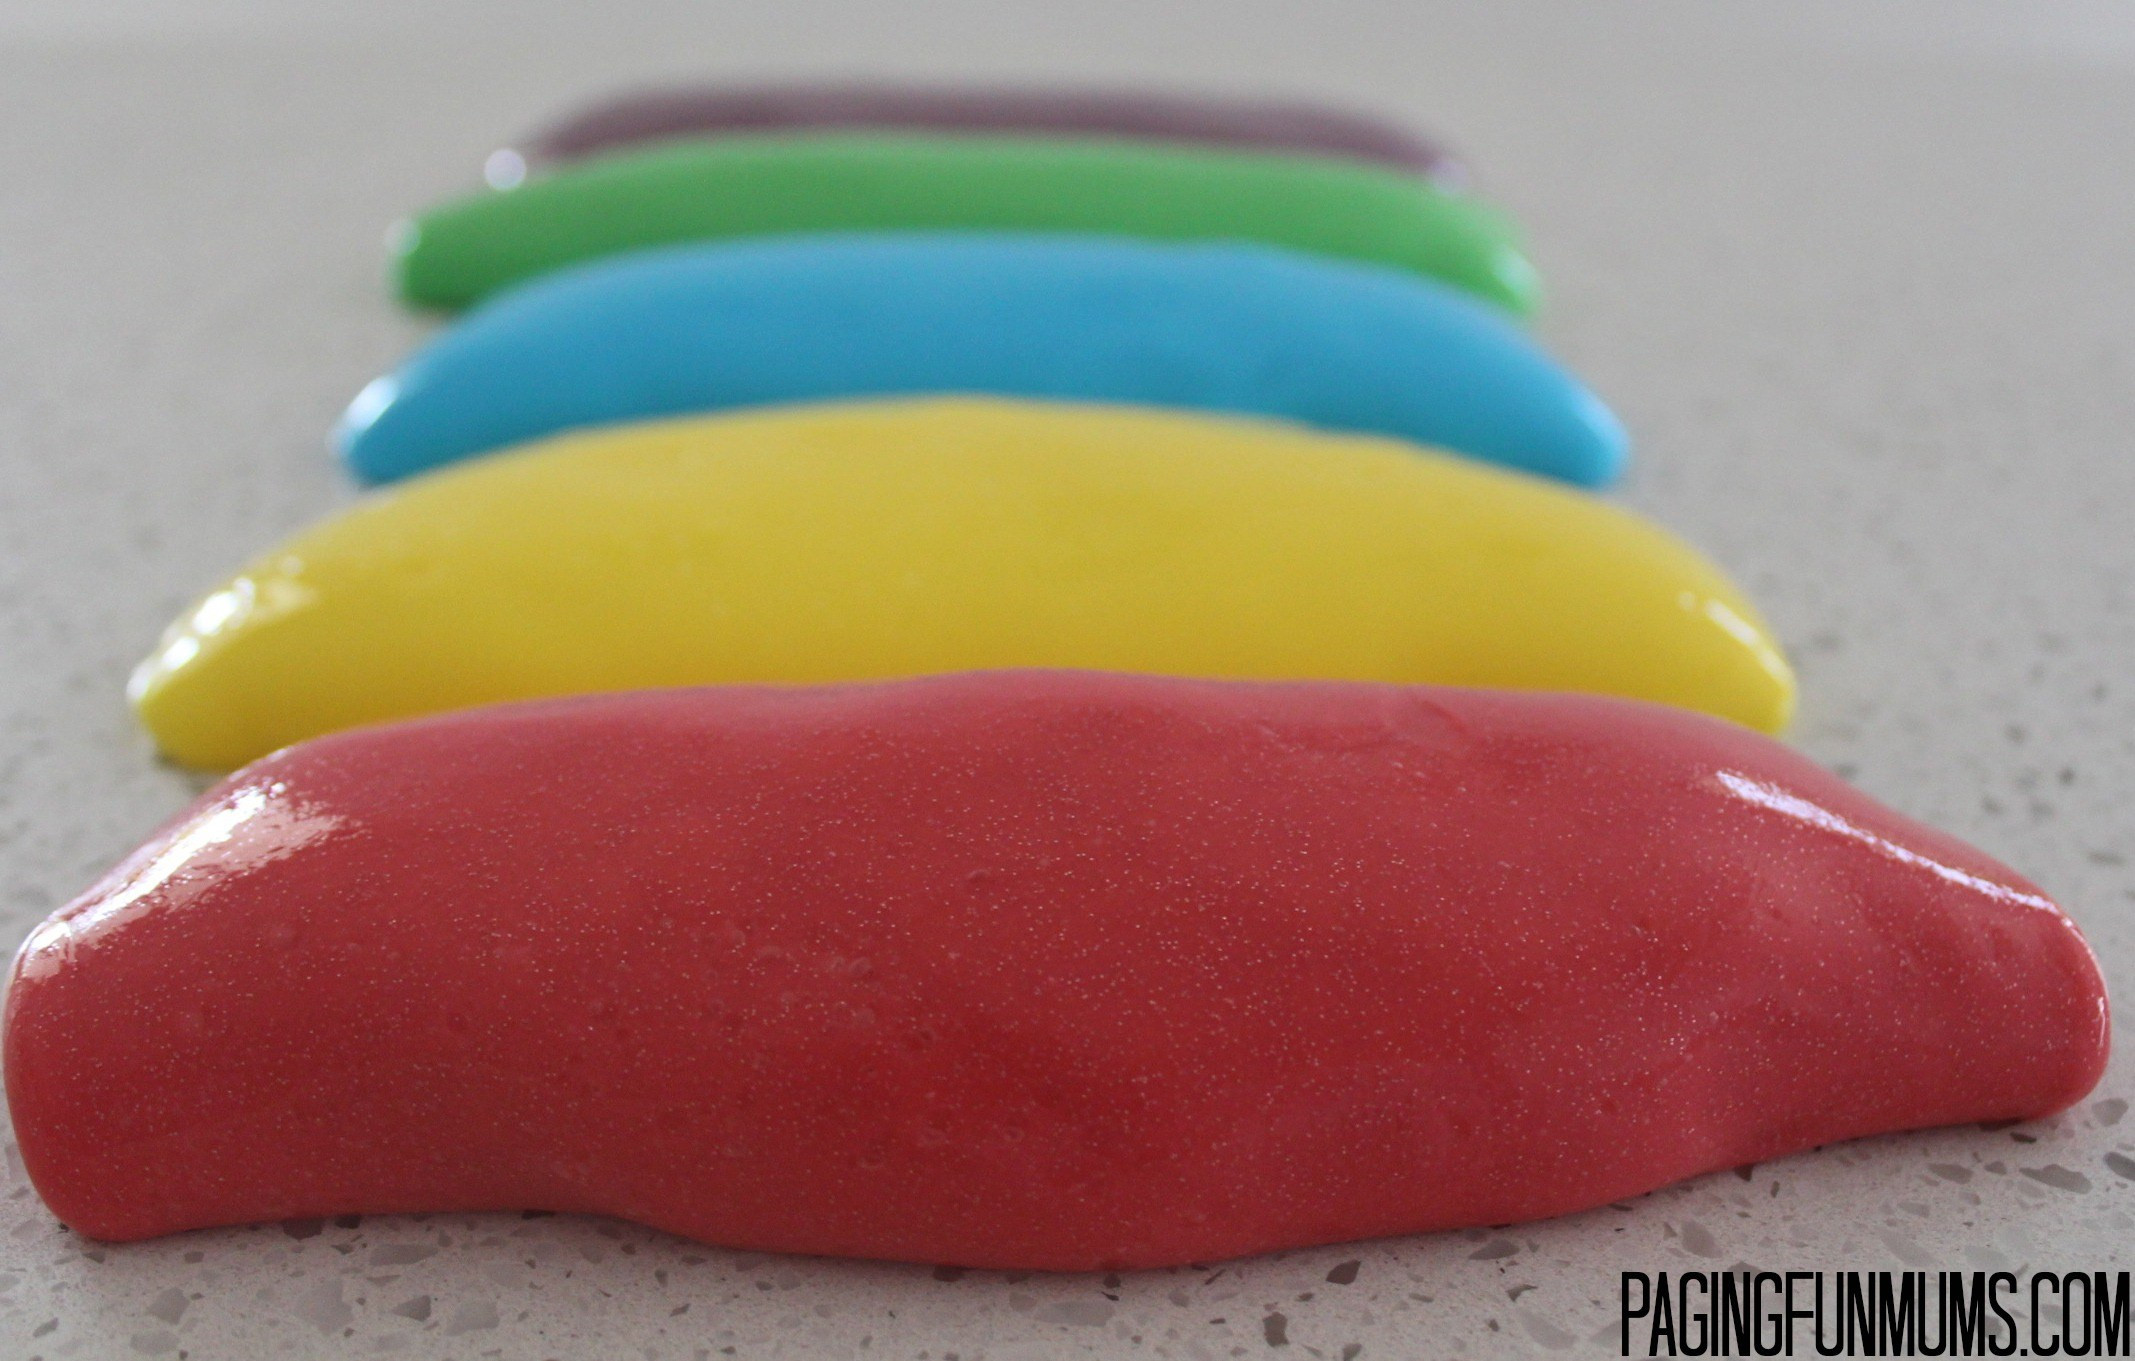 Best ideas about DIY Silly Putty
. Save or Pin Homemade Silly Putty Now.